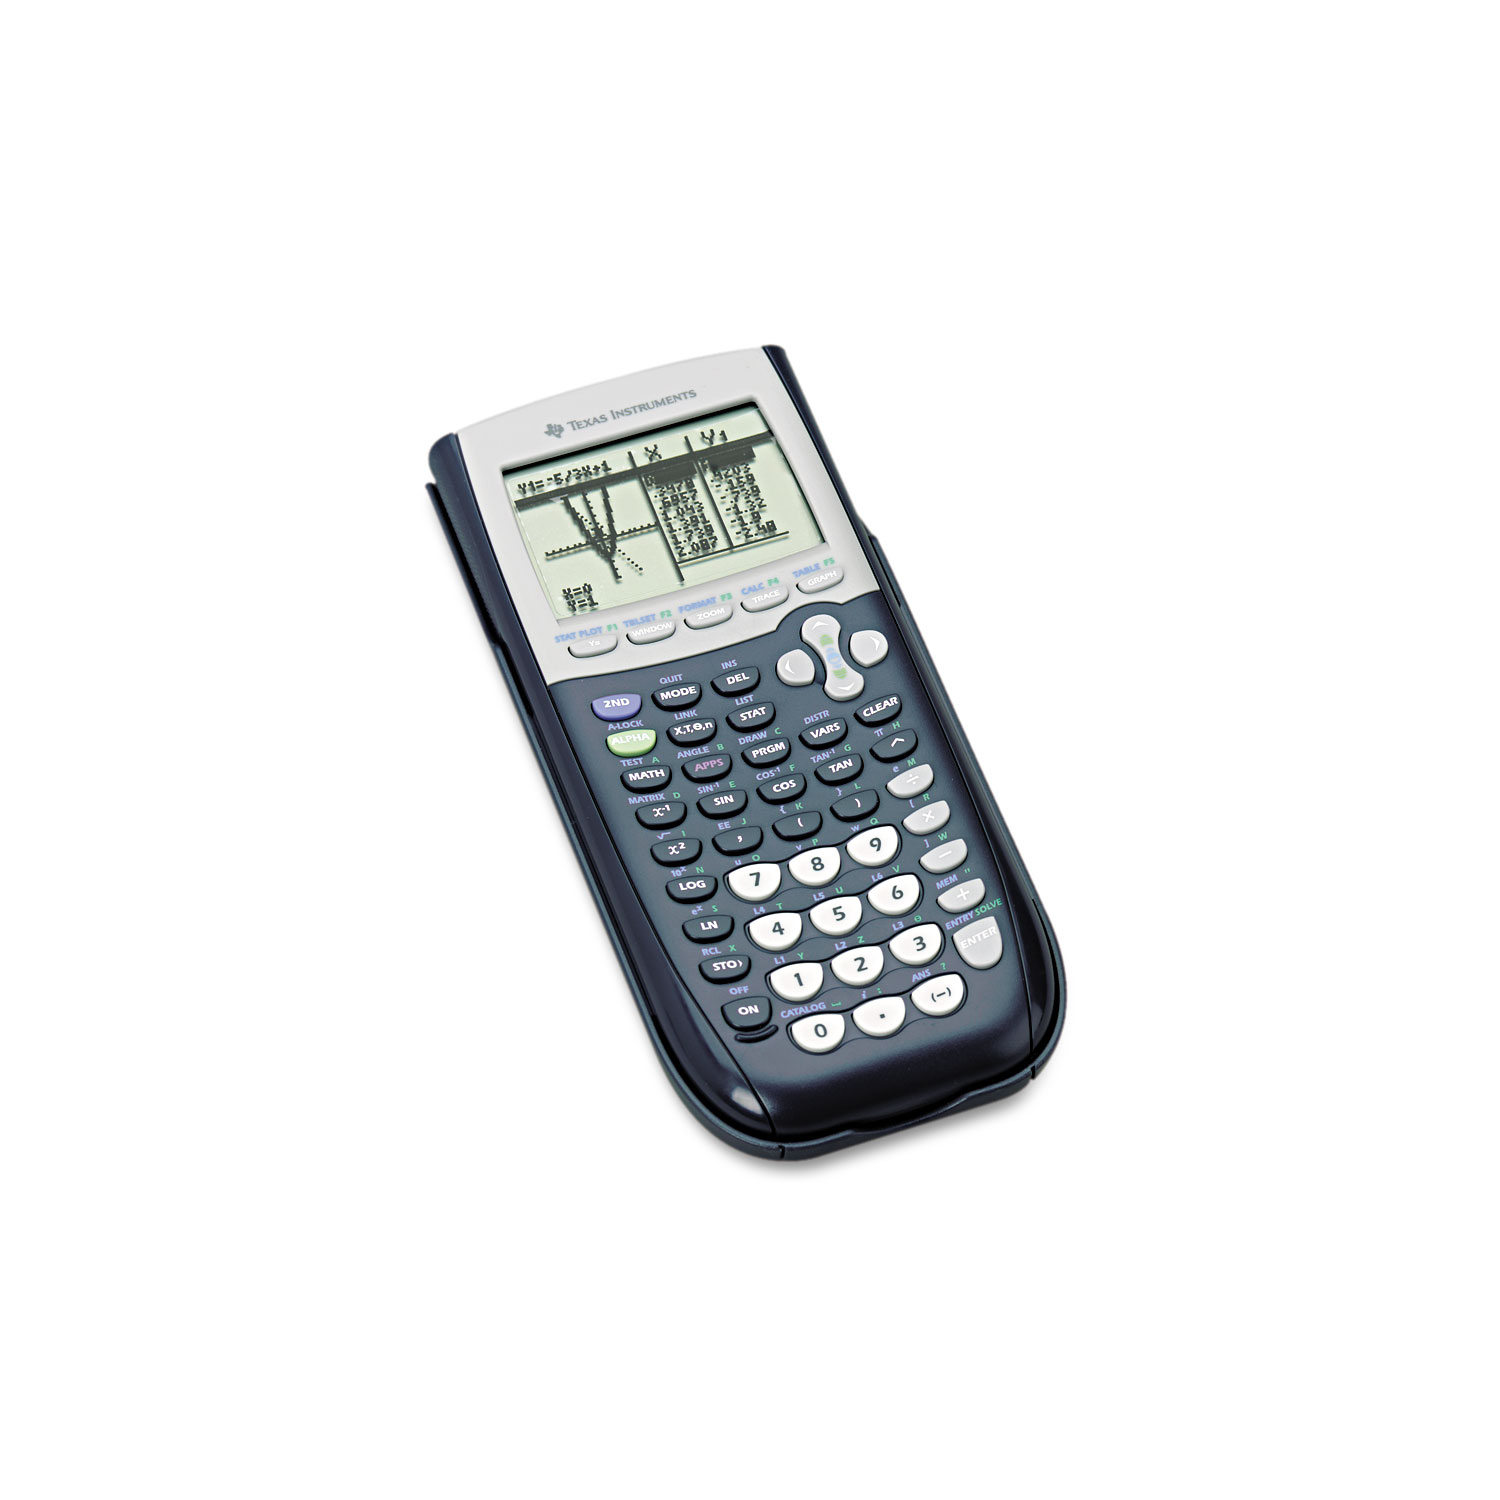  Texas Instruments 84PL/TBL/1L1/A TI-84Plus Programmable Graphing Calculator, 10-Digit LCD (TEXTI84PLUS) 